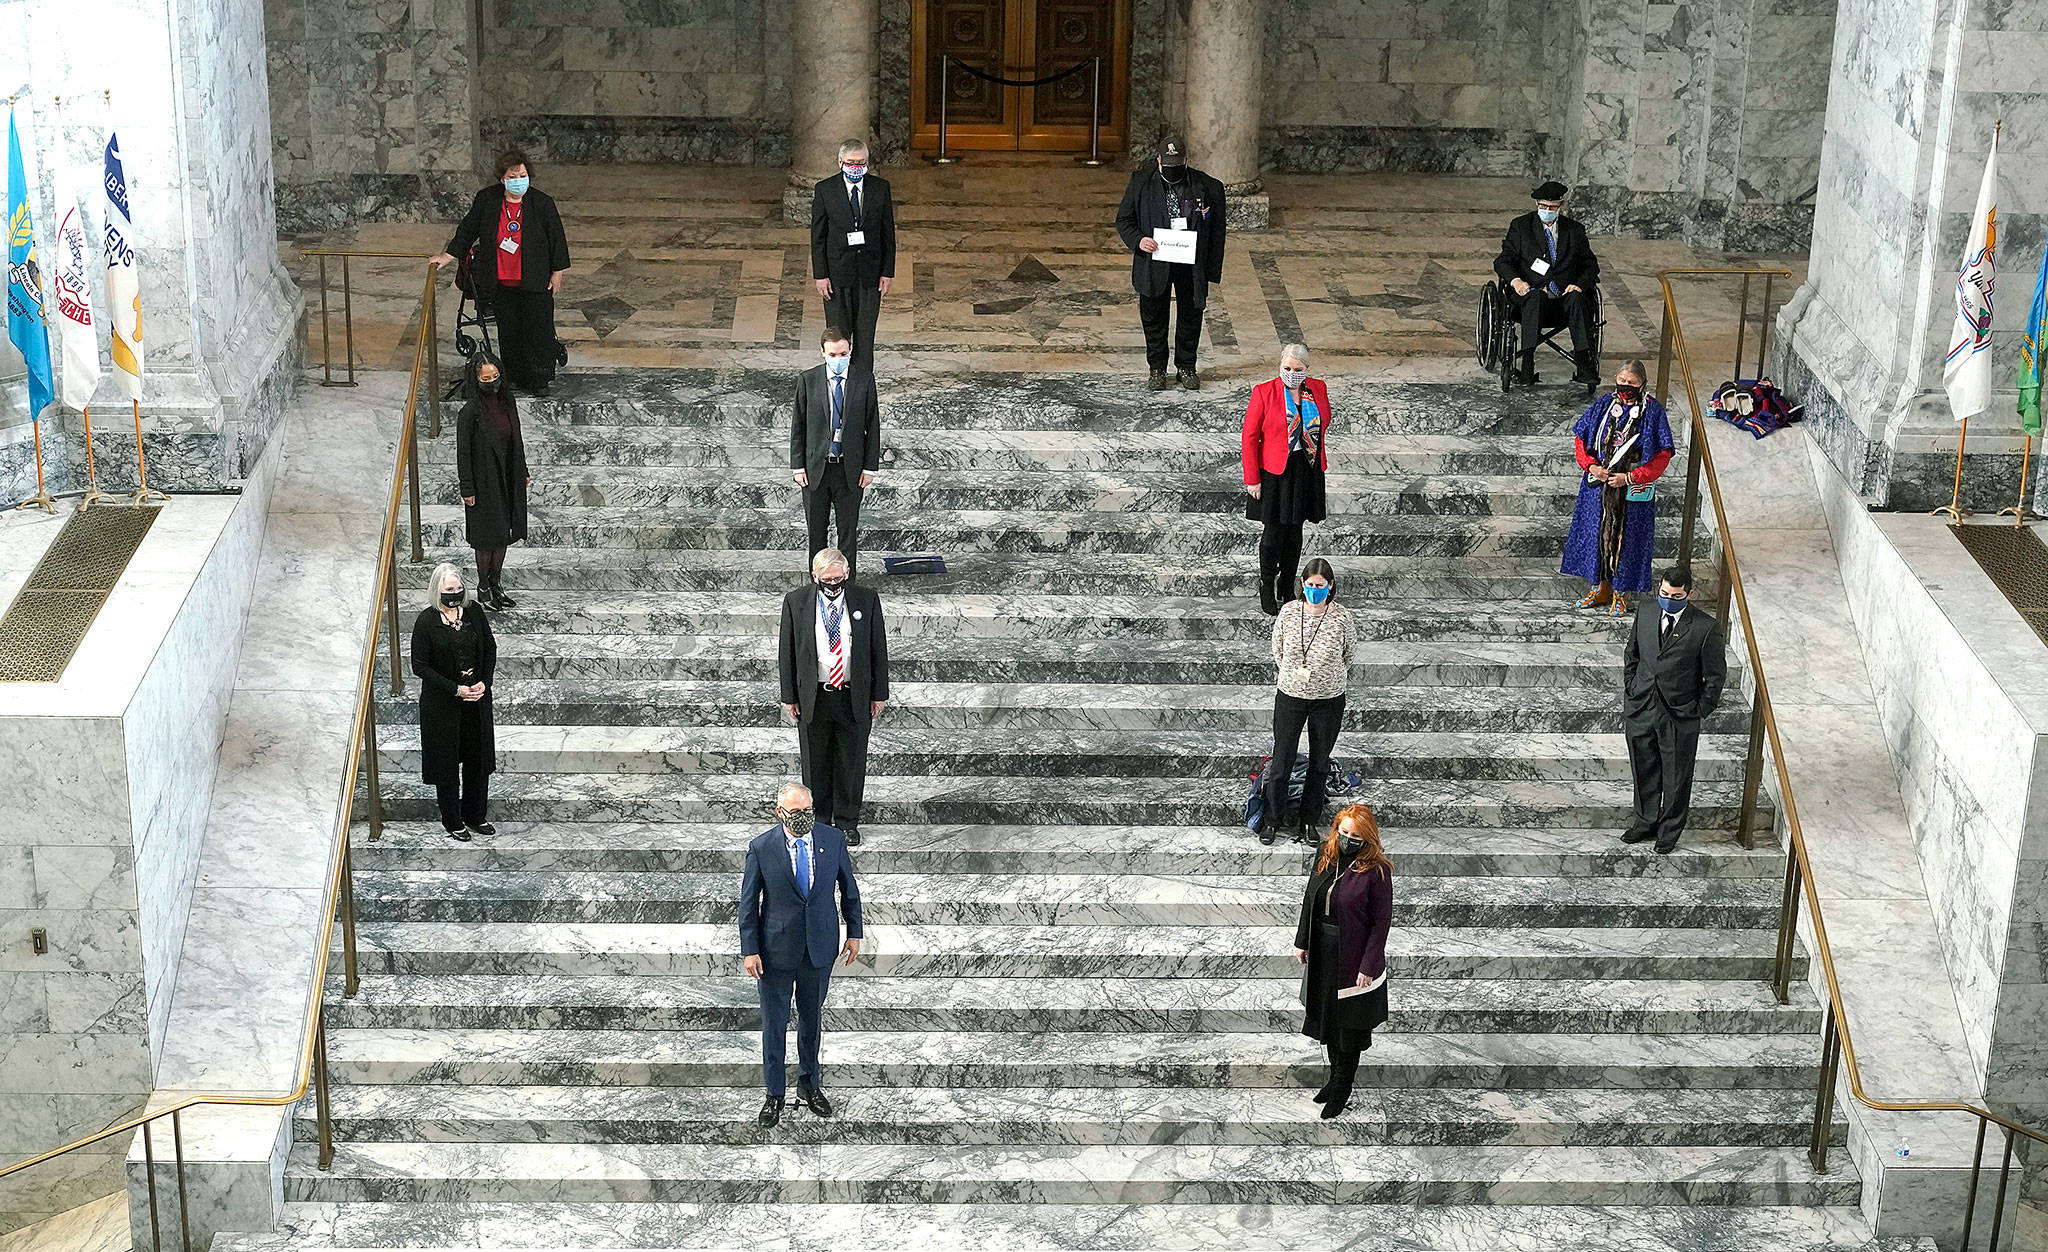 Members of Washington’s Electoral College pose for a socially distanced photo along with Gov. Jay Inslee (front row, left) and Secretary of State Kim Wyman (front row right) after they cast their votes at the state Capitol in Olympia on Monday. (AP Photo/Ted S. Warren)